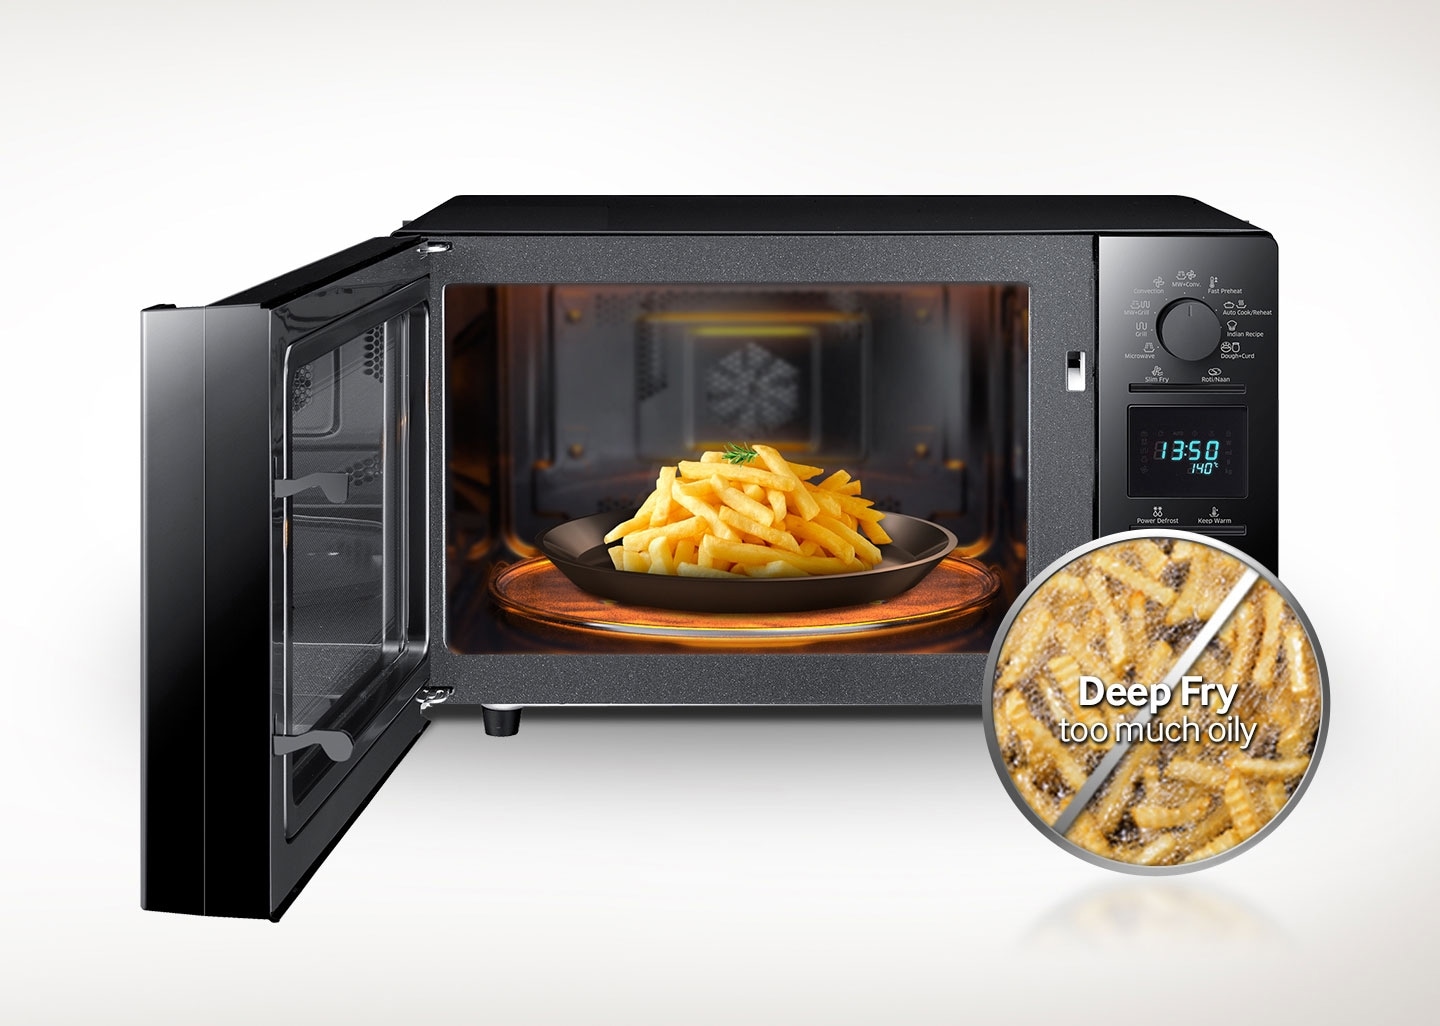 Microwave that cooks healthy fried food